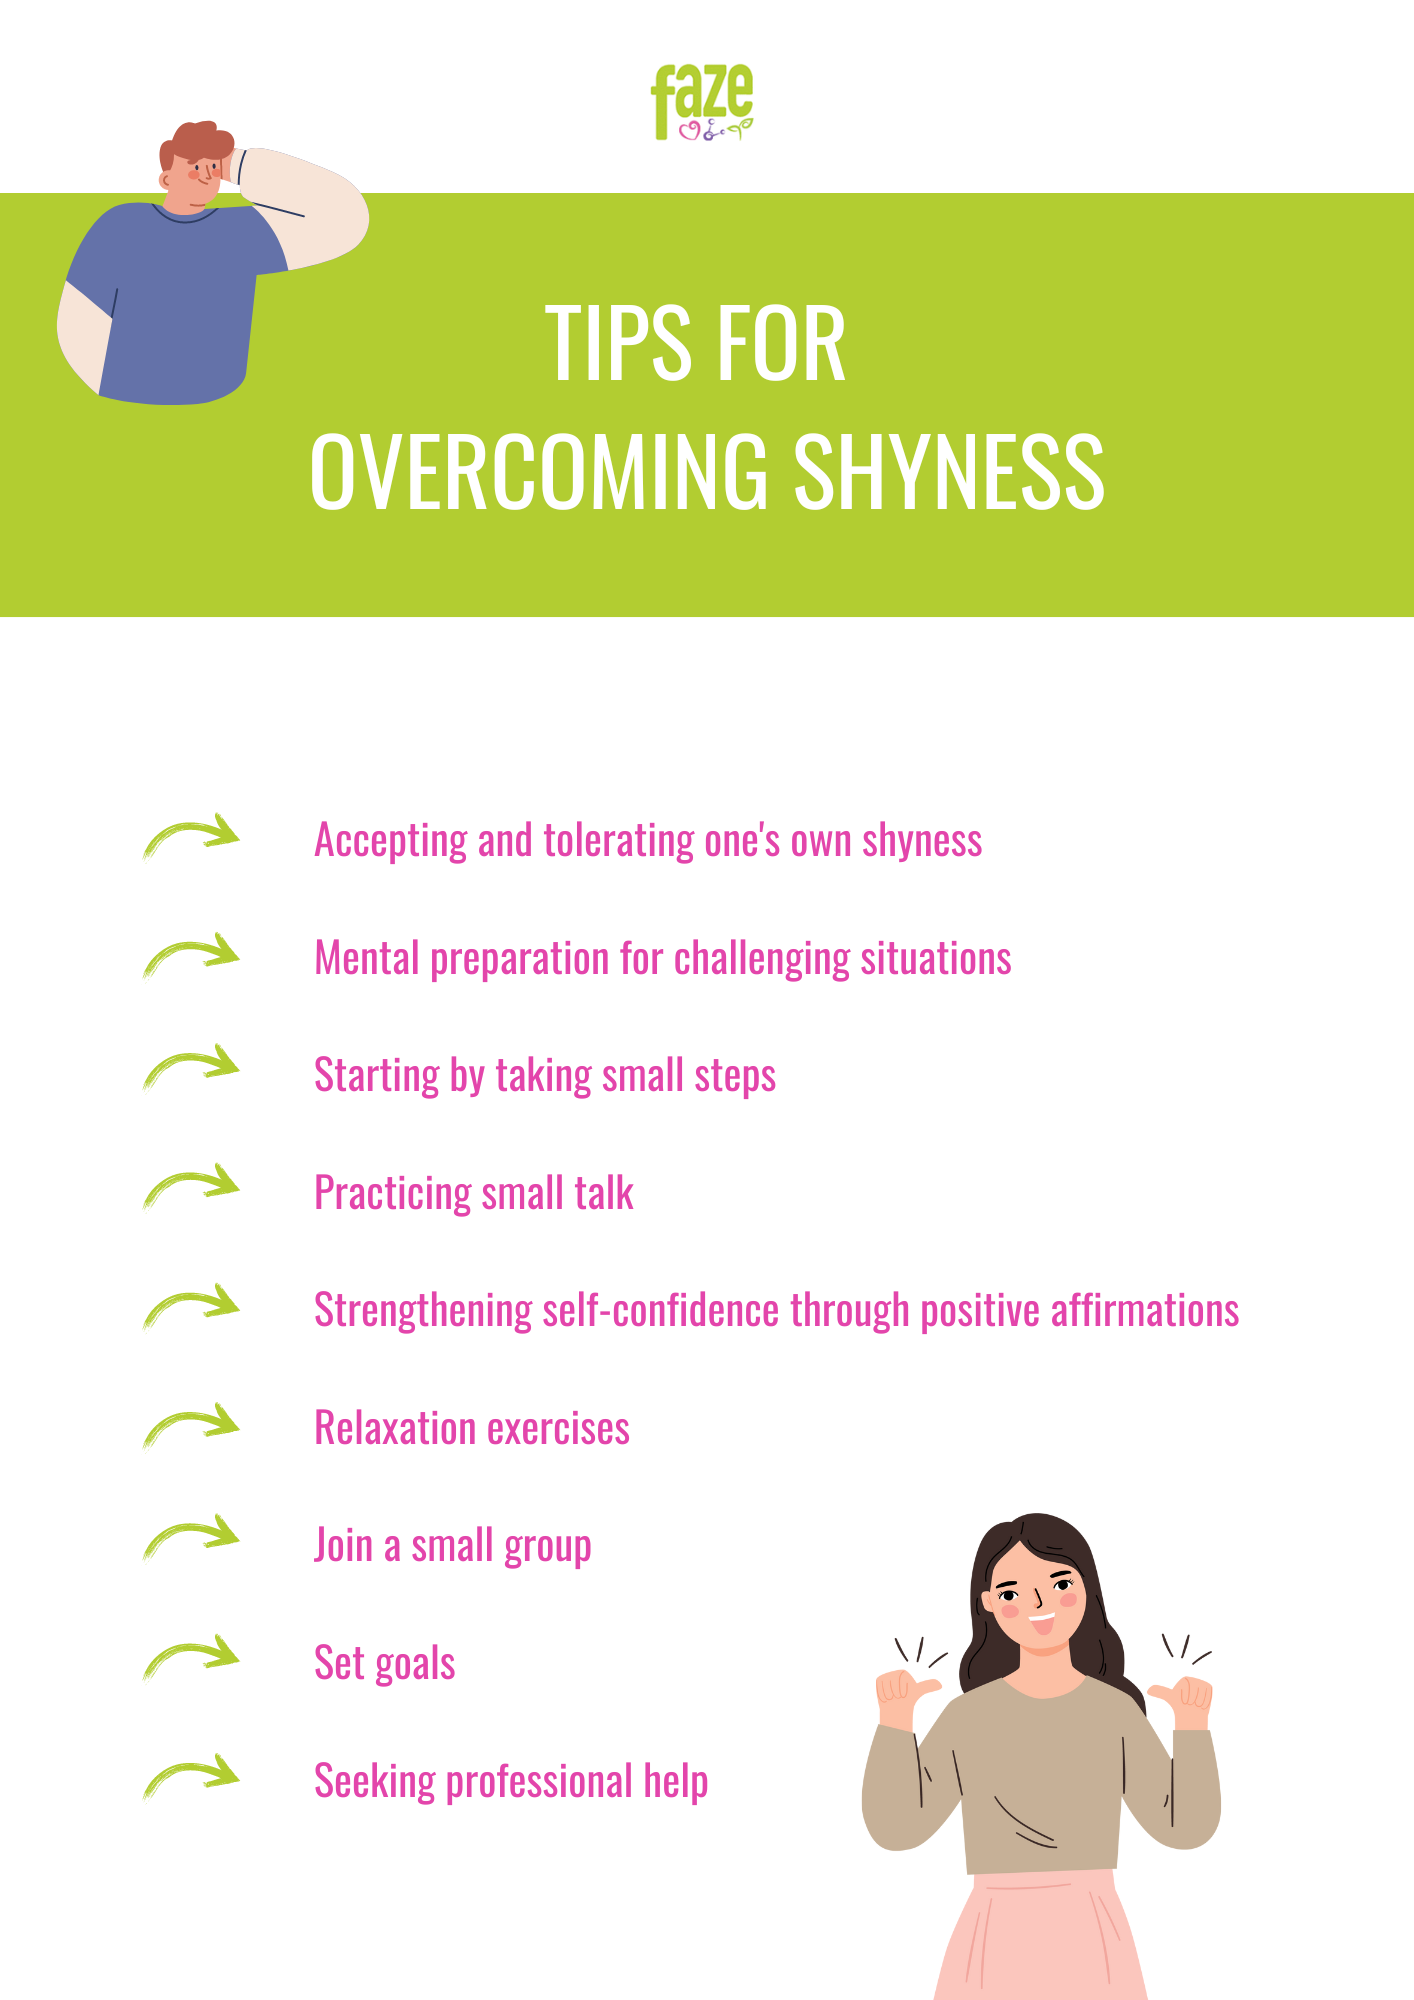 Tips for overcoming shyness